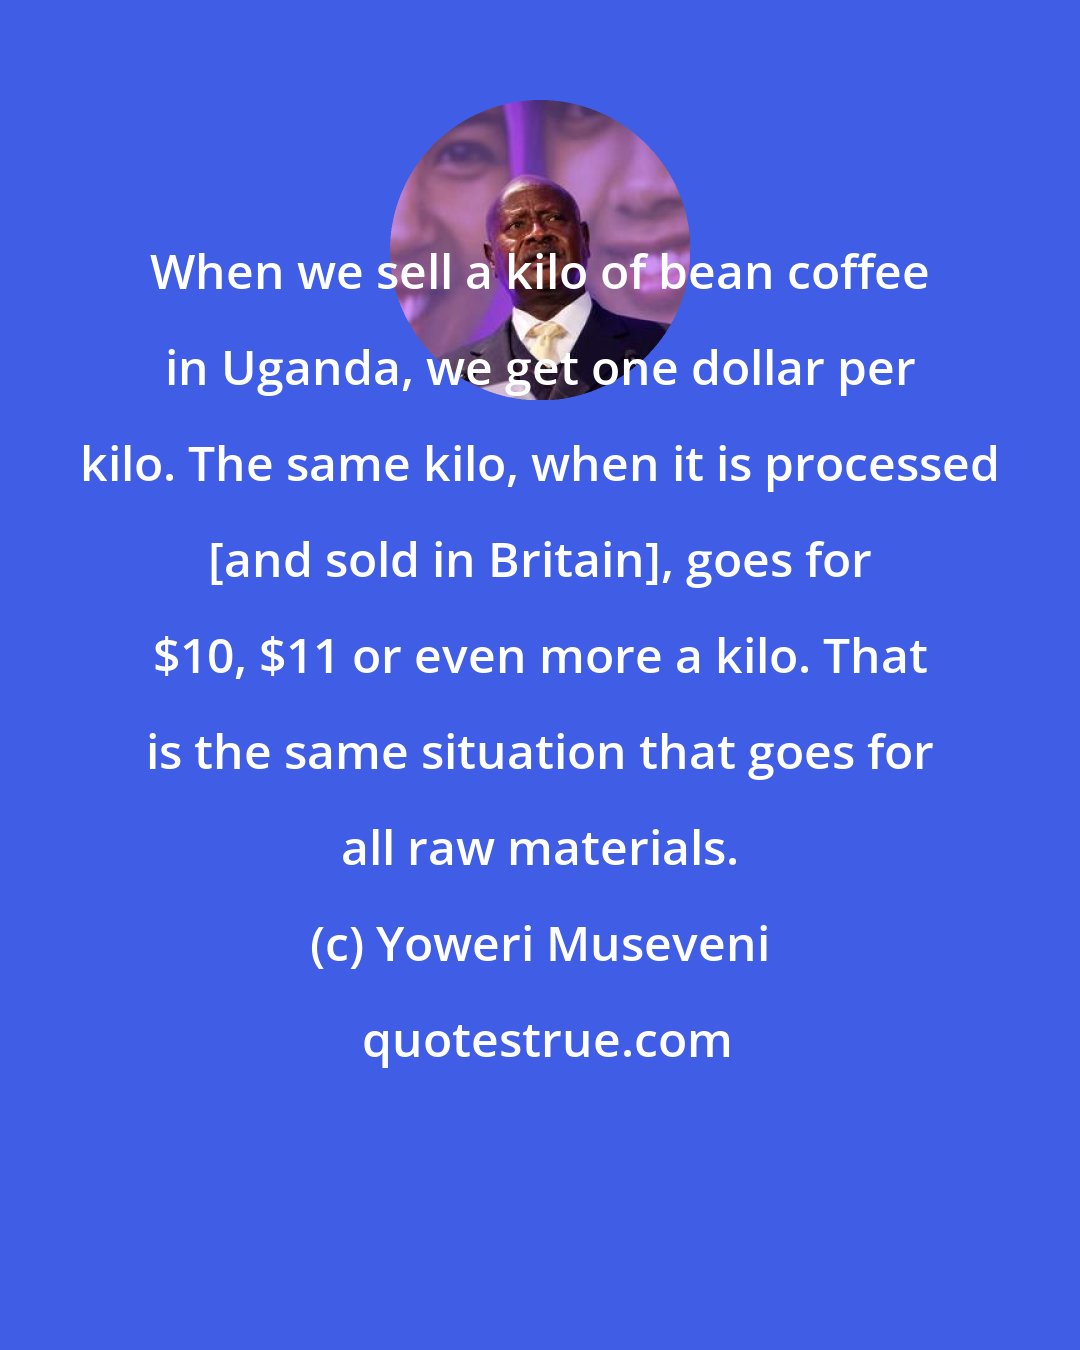 Yoweri Museveni: When we sell a kilo of bean coffee in Uganda, we get one dollar per kilo. The same kilo, when it is processed [and sold in Britain], goes for $10, $11 or even more a kilo. That is the same situation that goes for all raw materials.